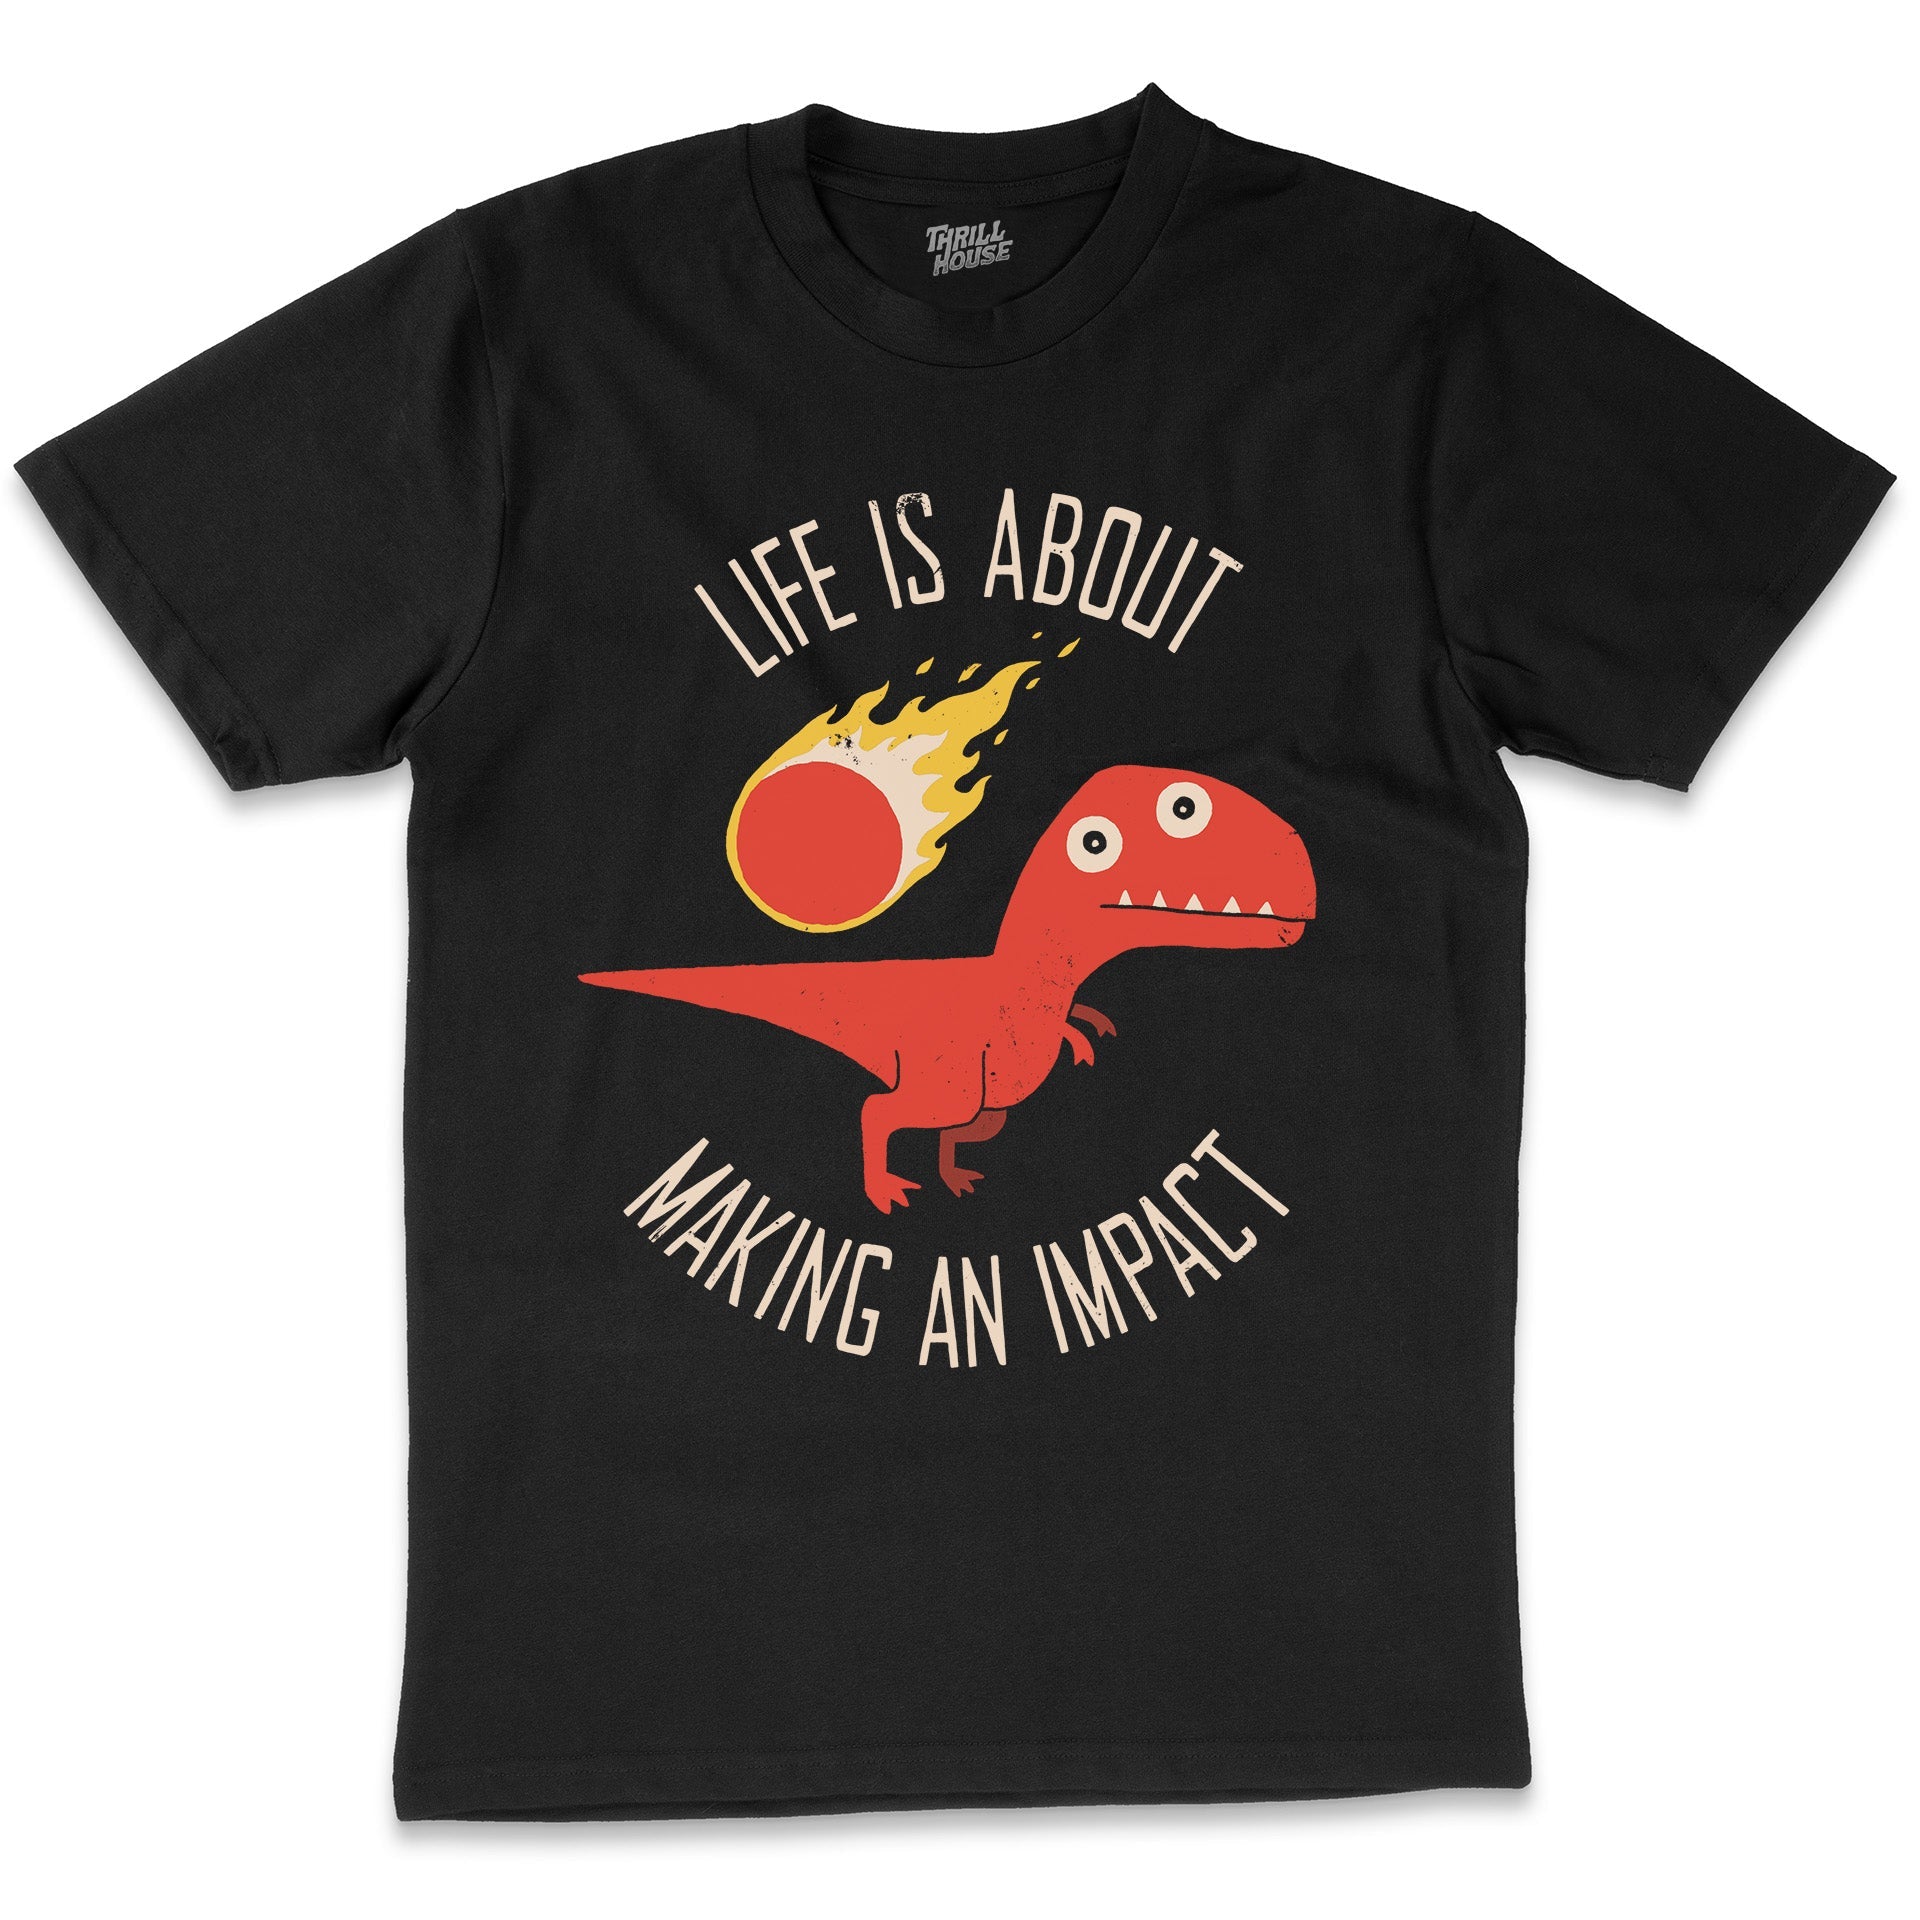 Life Is About Making An Impact Funny Dinosaur T-Rex Comet Cute Slogan Cotton T-Shirt